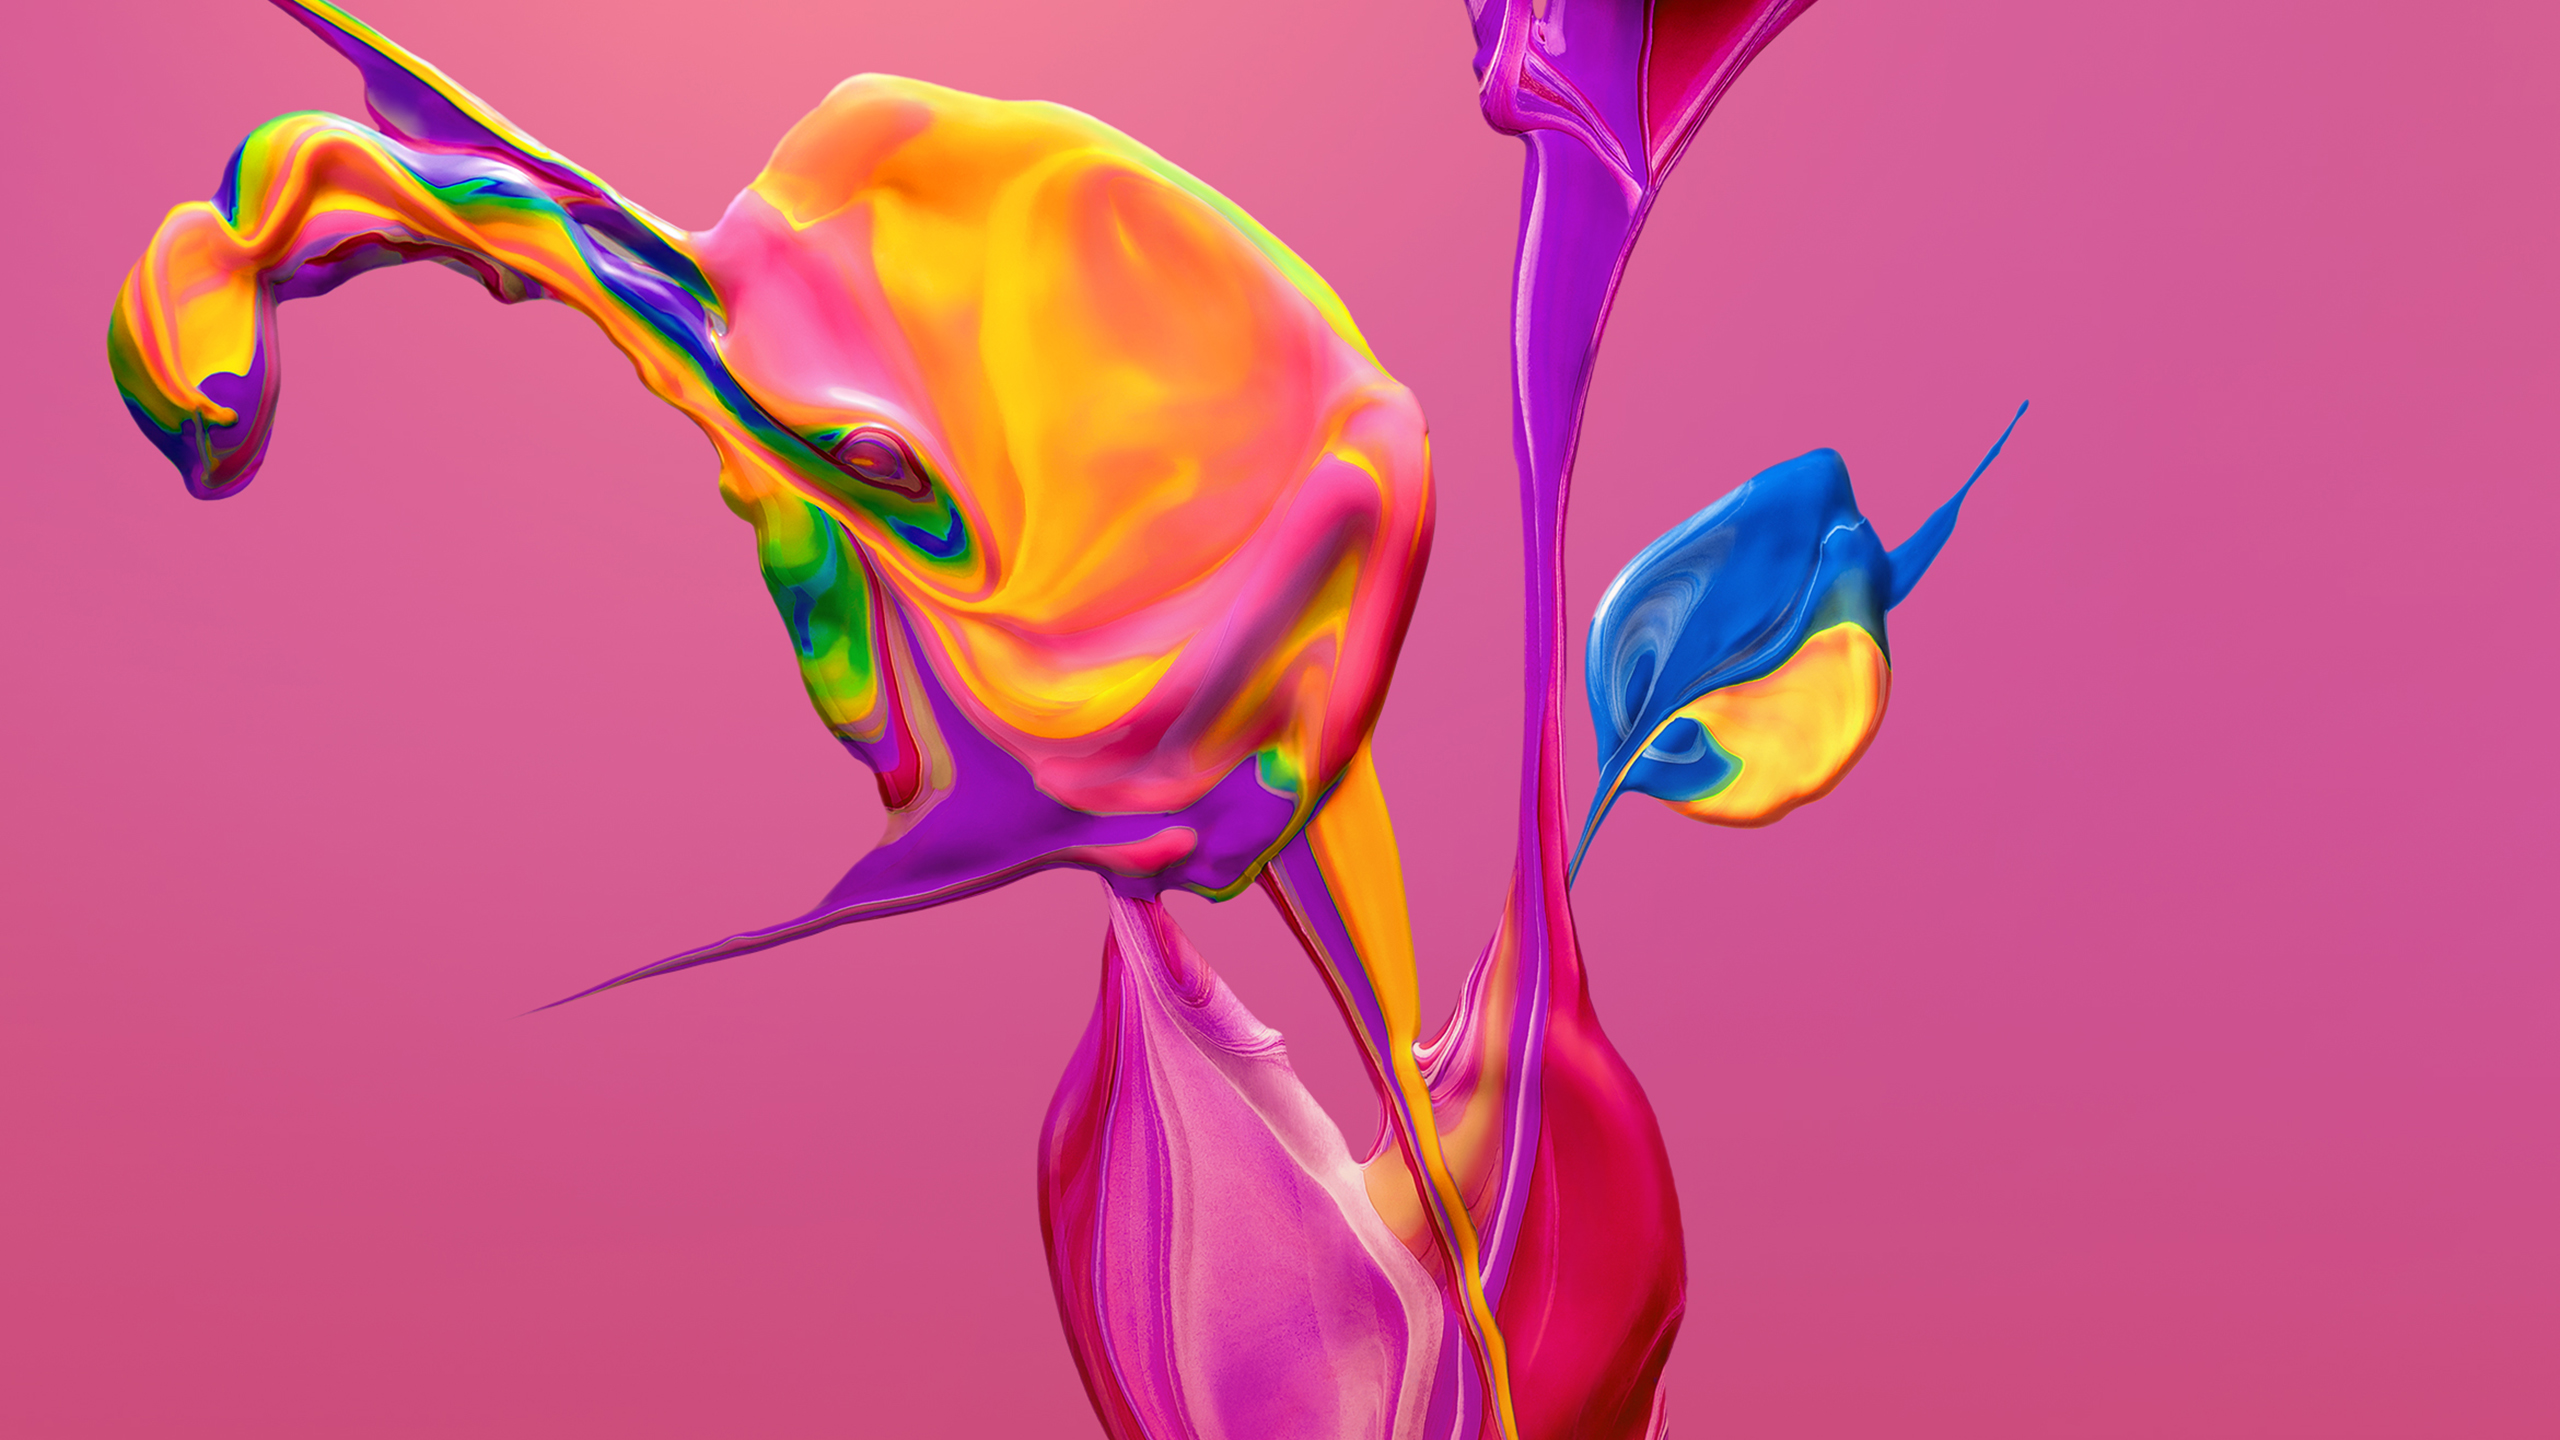 Paint Huawei P30 Pro Stock Wallpapers